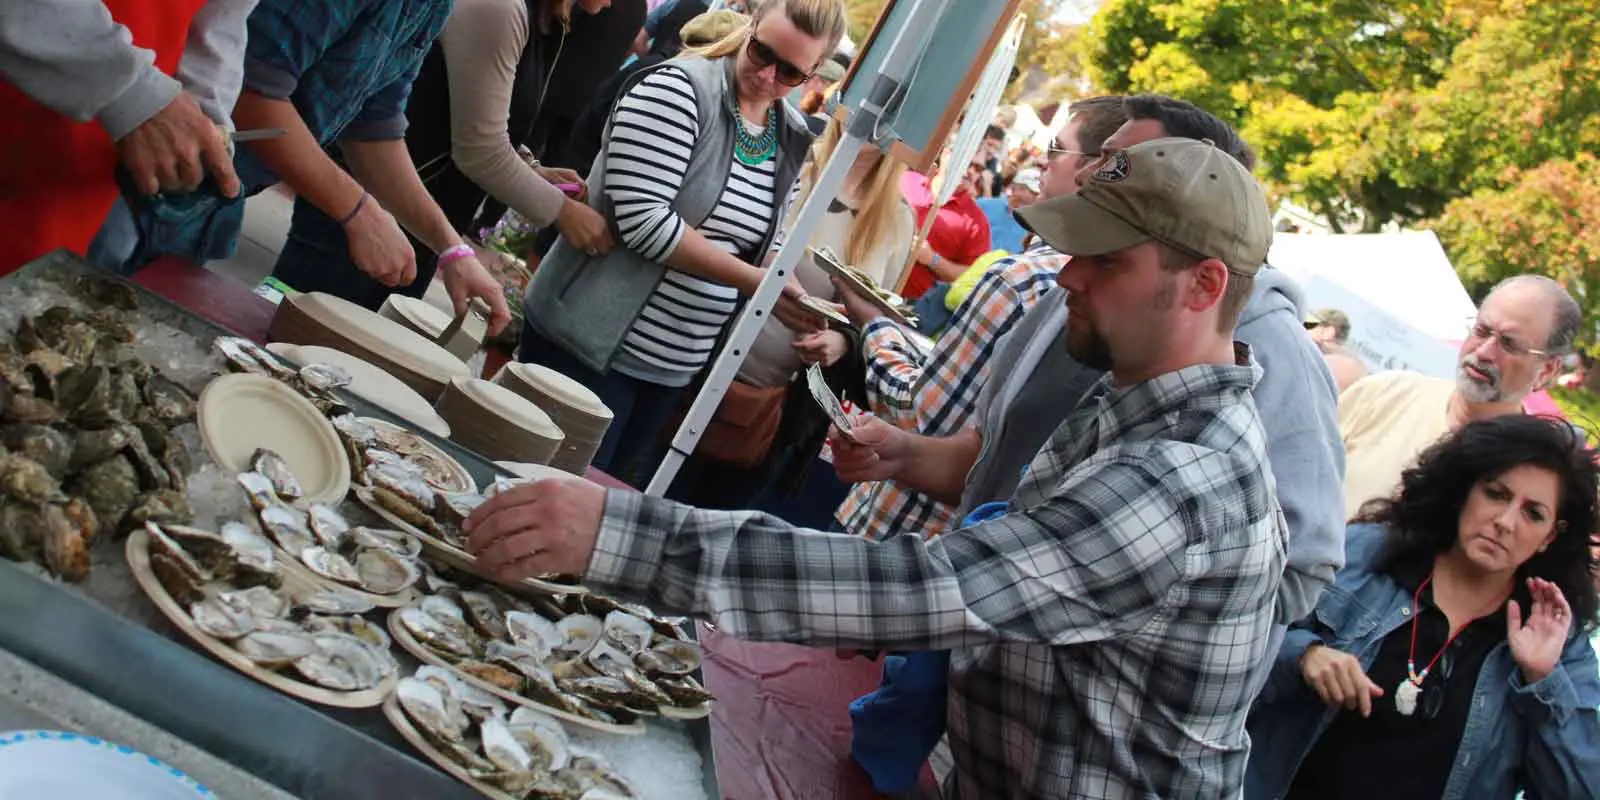 Crowds surrounding a table full of wellfleet oysters at the Wellfleet OysterFest.